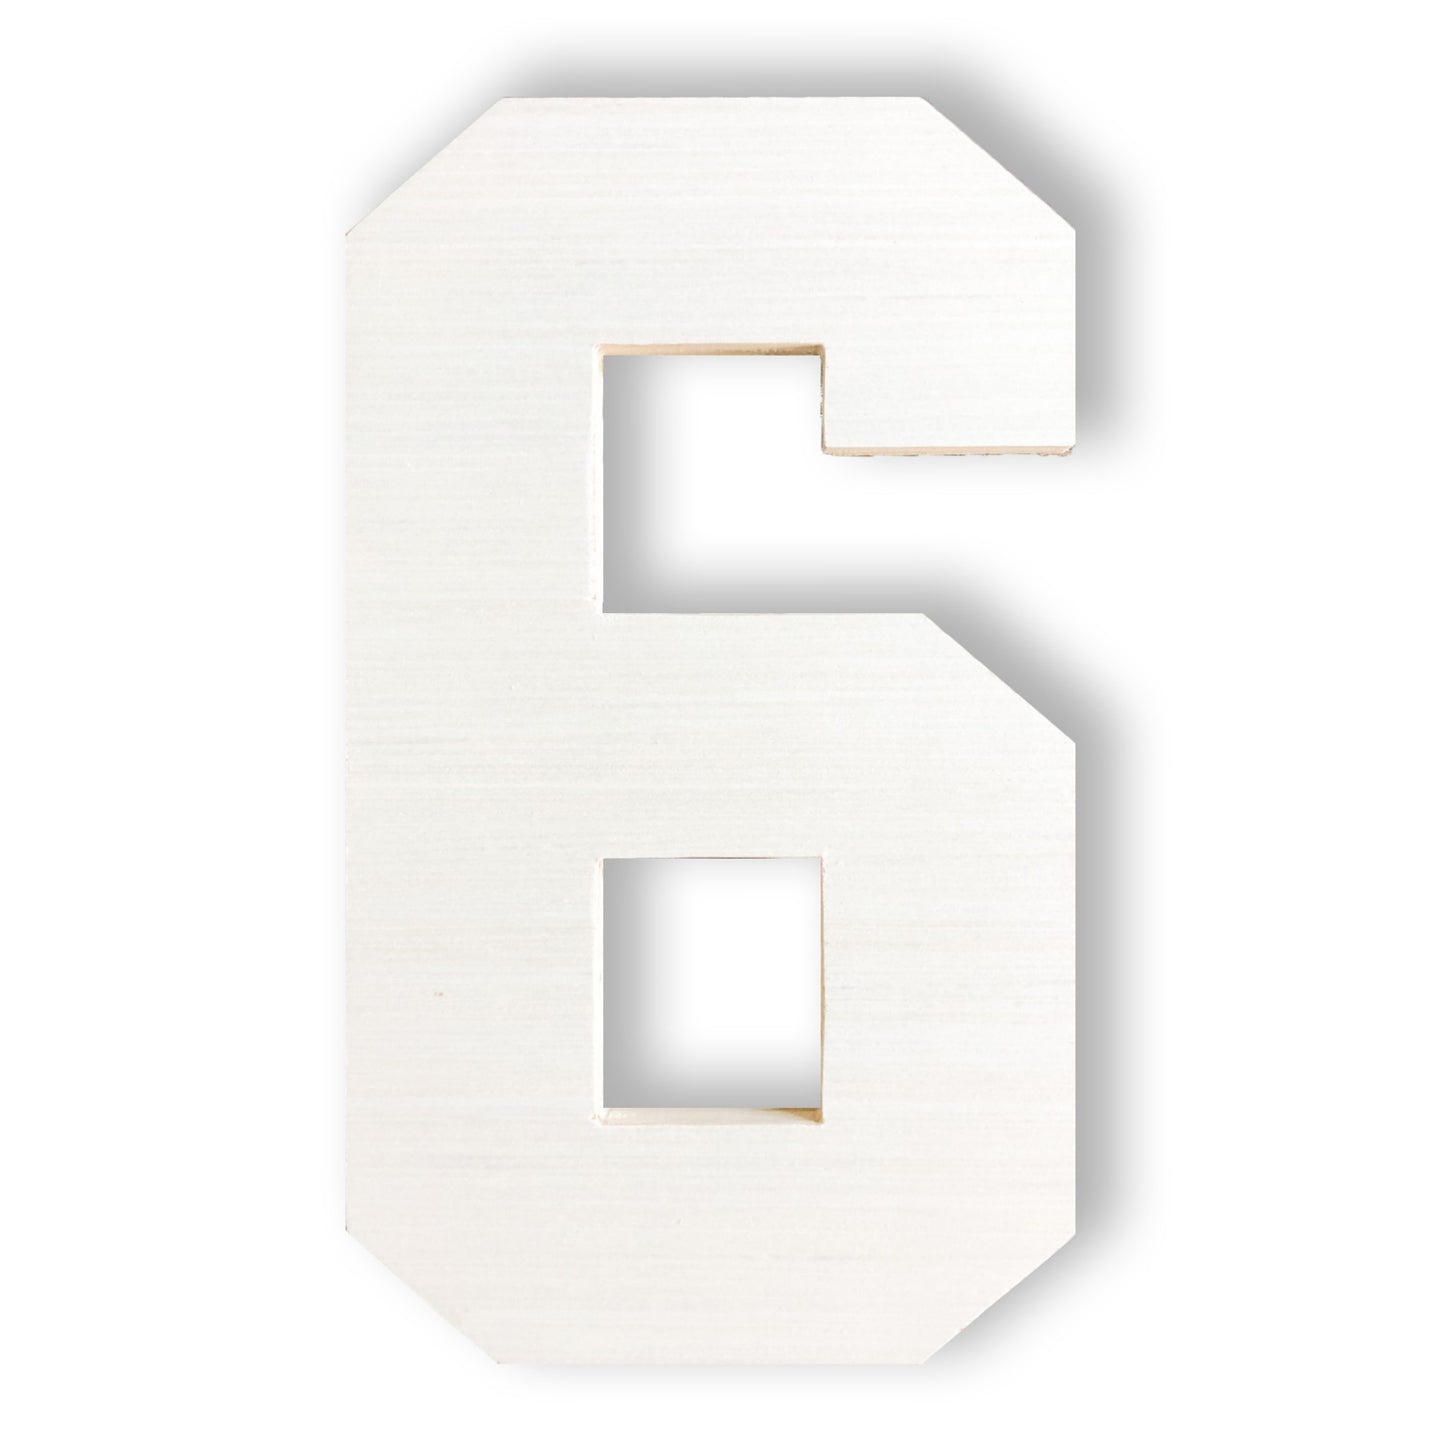 15 Inch Wooden Letters and Numbers | "Sturdy and Well Made!"